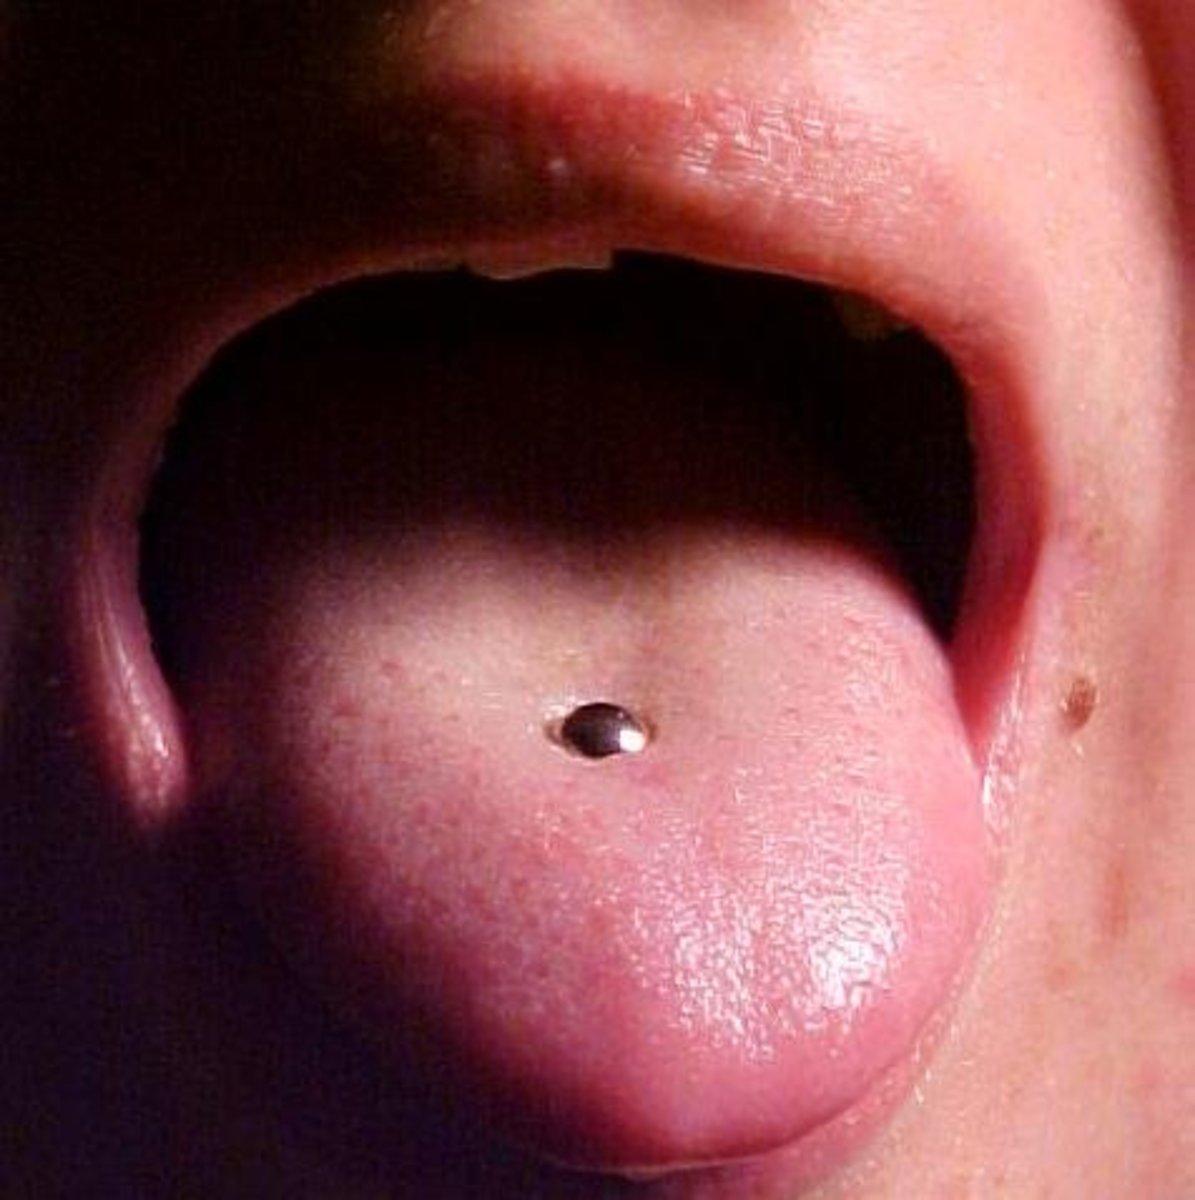 How to Take Care of a Tongue Piercing